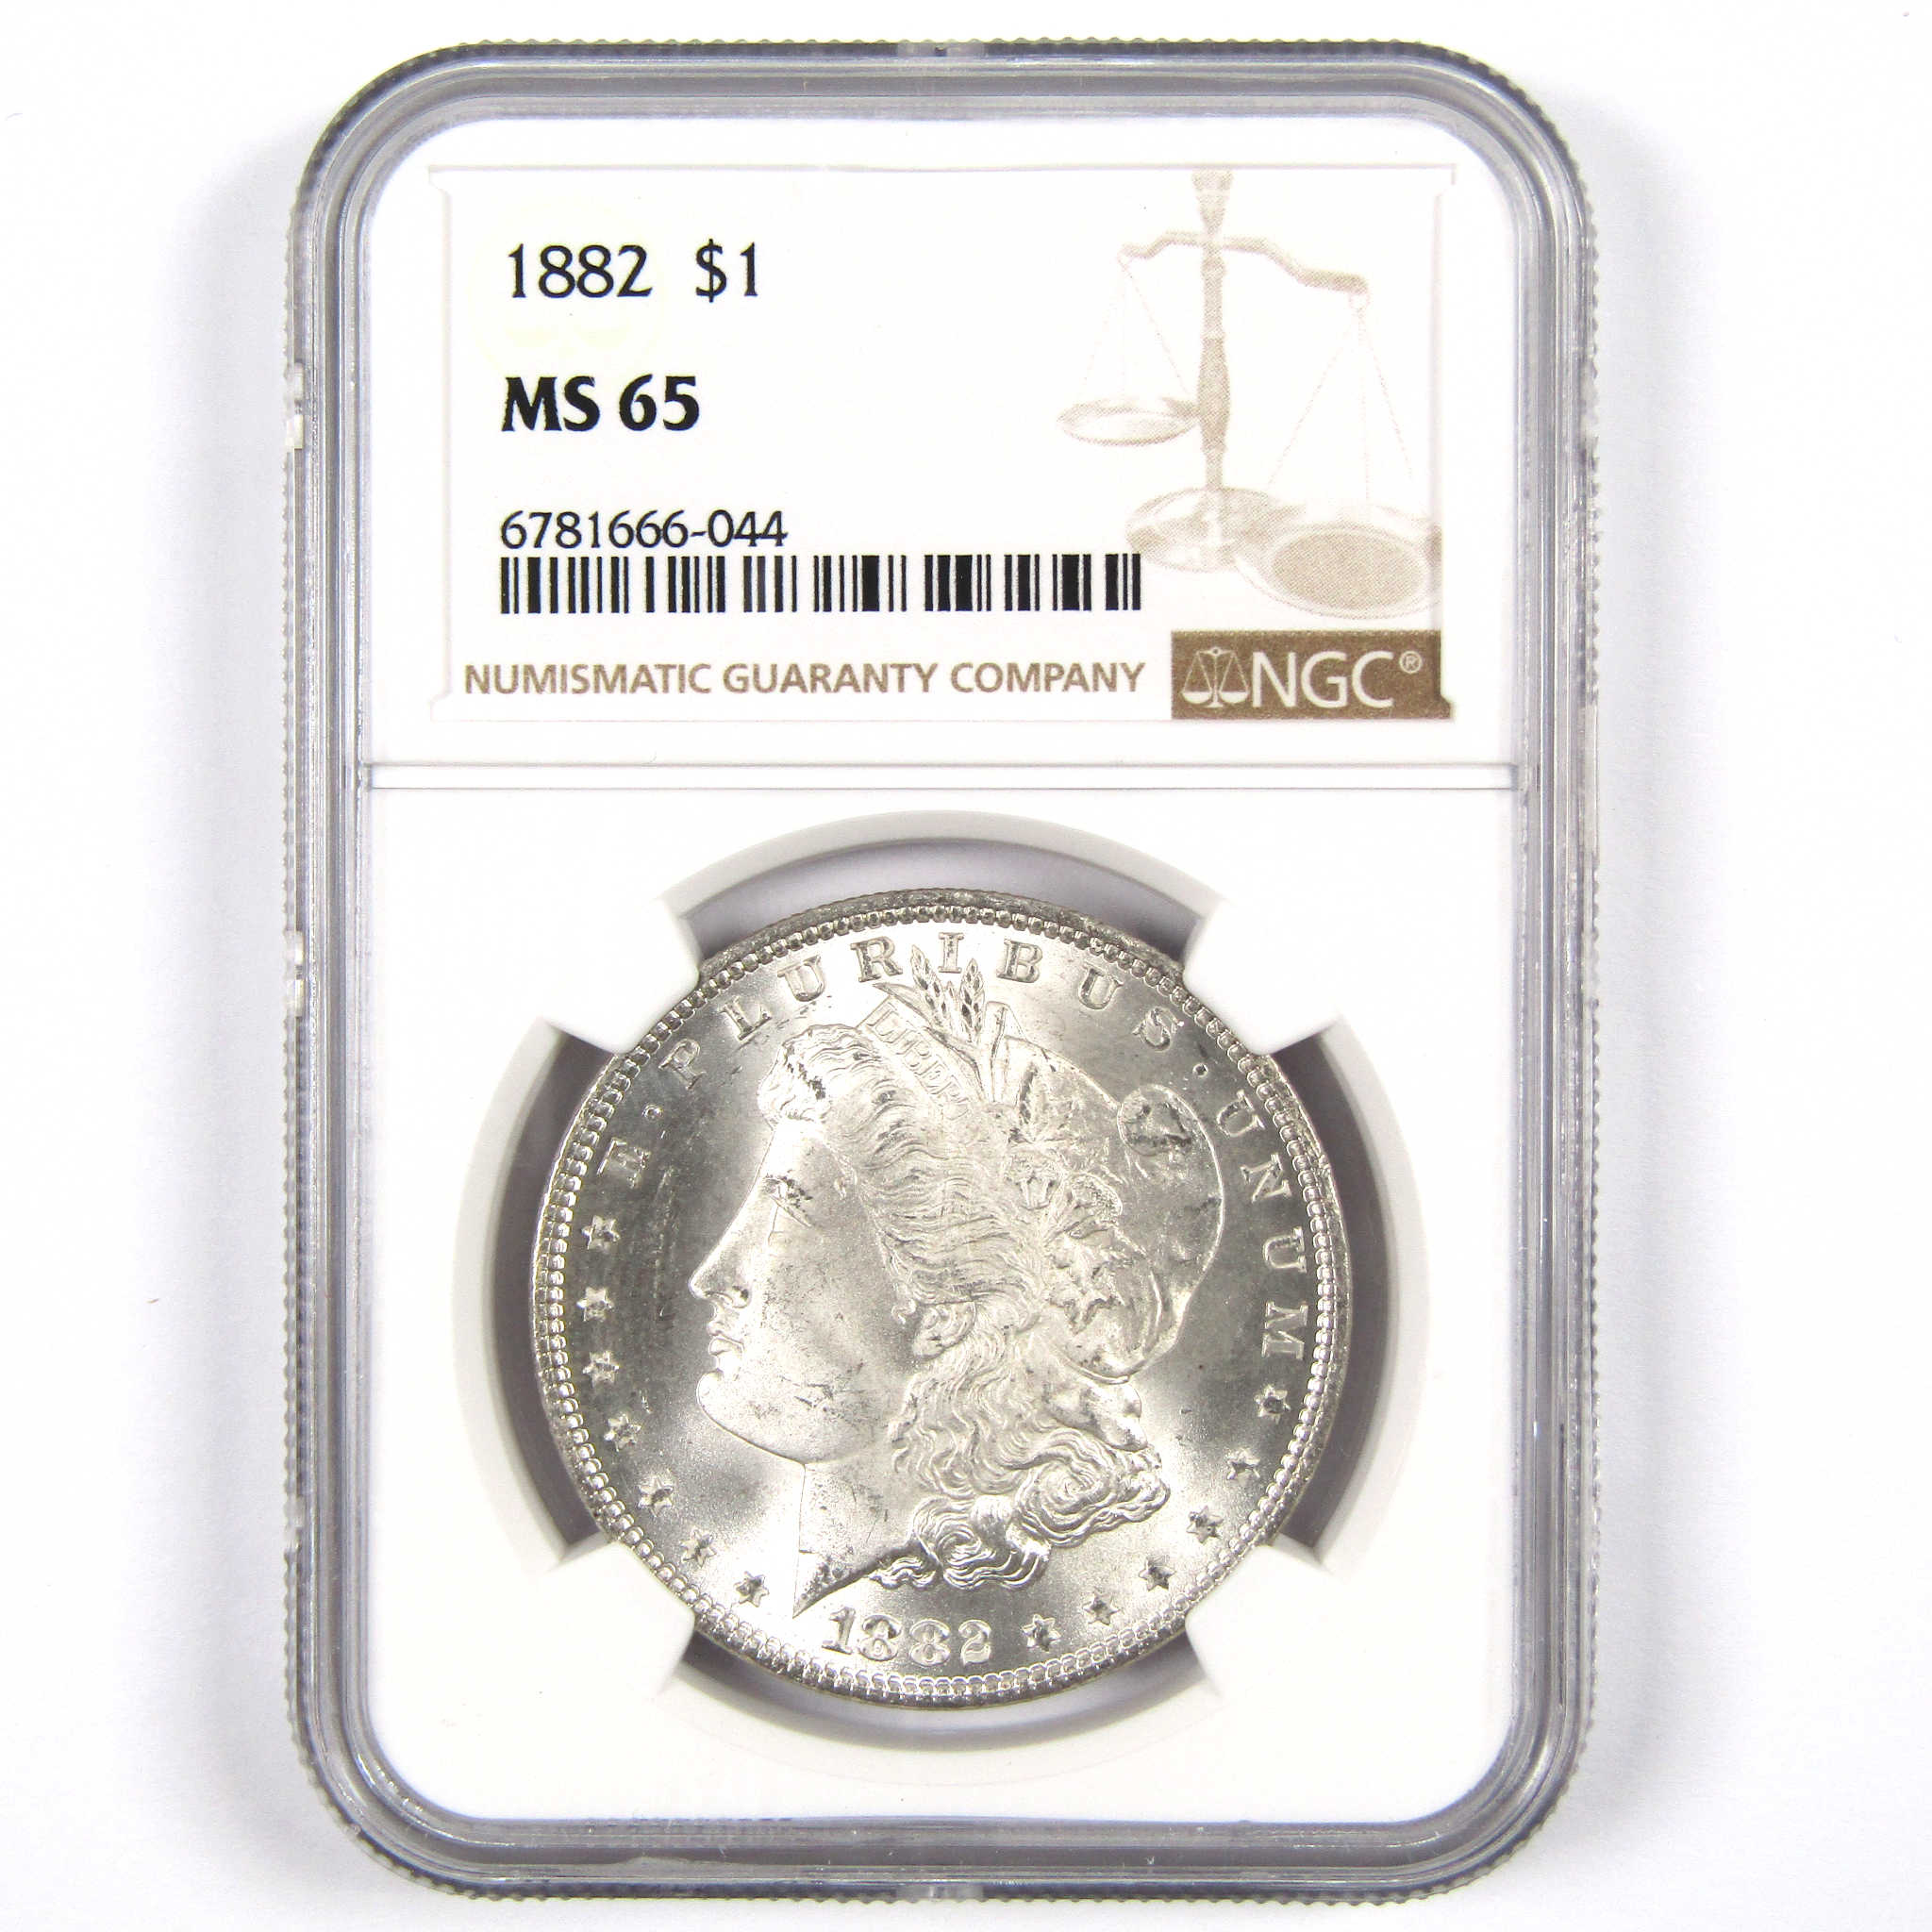 1882 Morgan Dollar MS 65 NGC 90% Silver $1 Uncirculated Coin SKU:I7535 - Morgan coin - Morgan silver dollar - Morgan silver dollar for sale - Profile Coins &amp; Collectibles